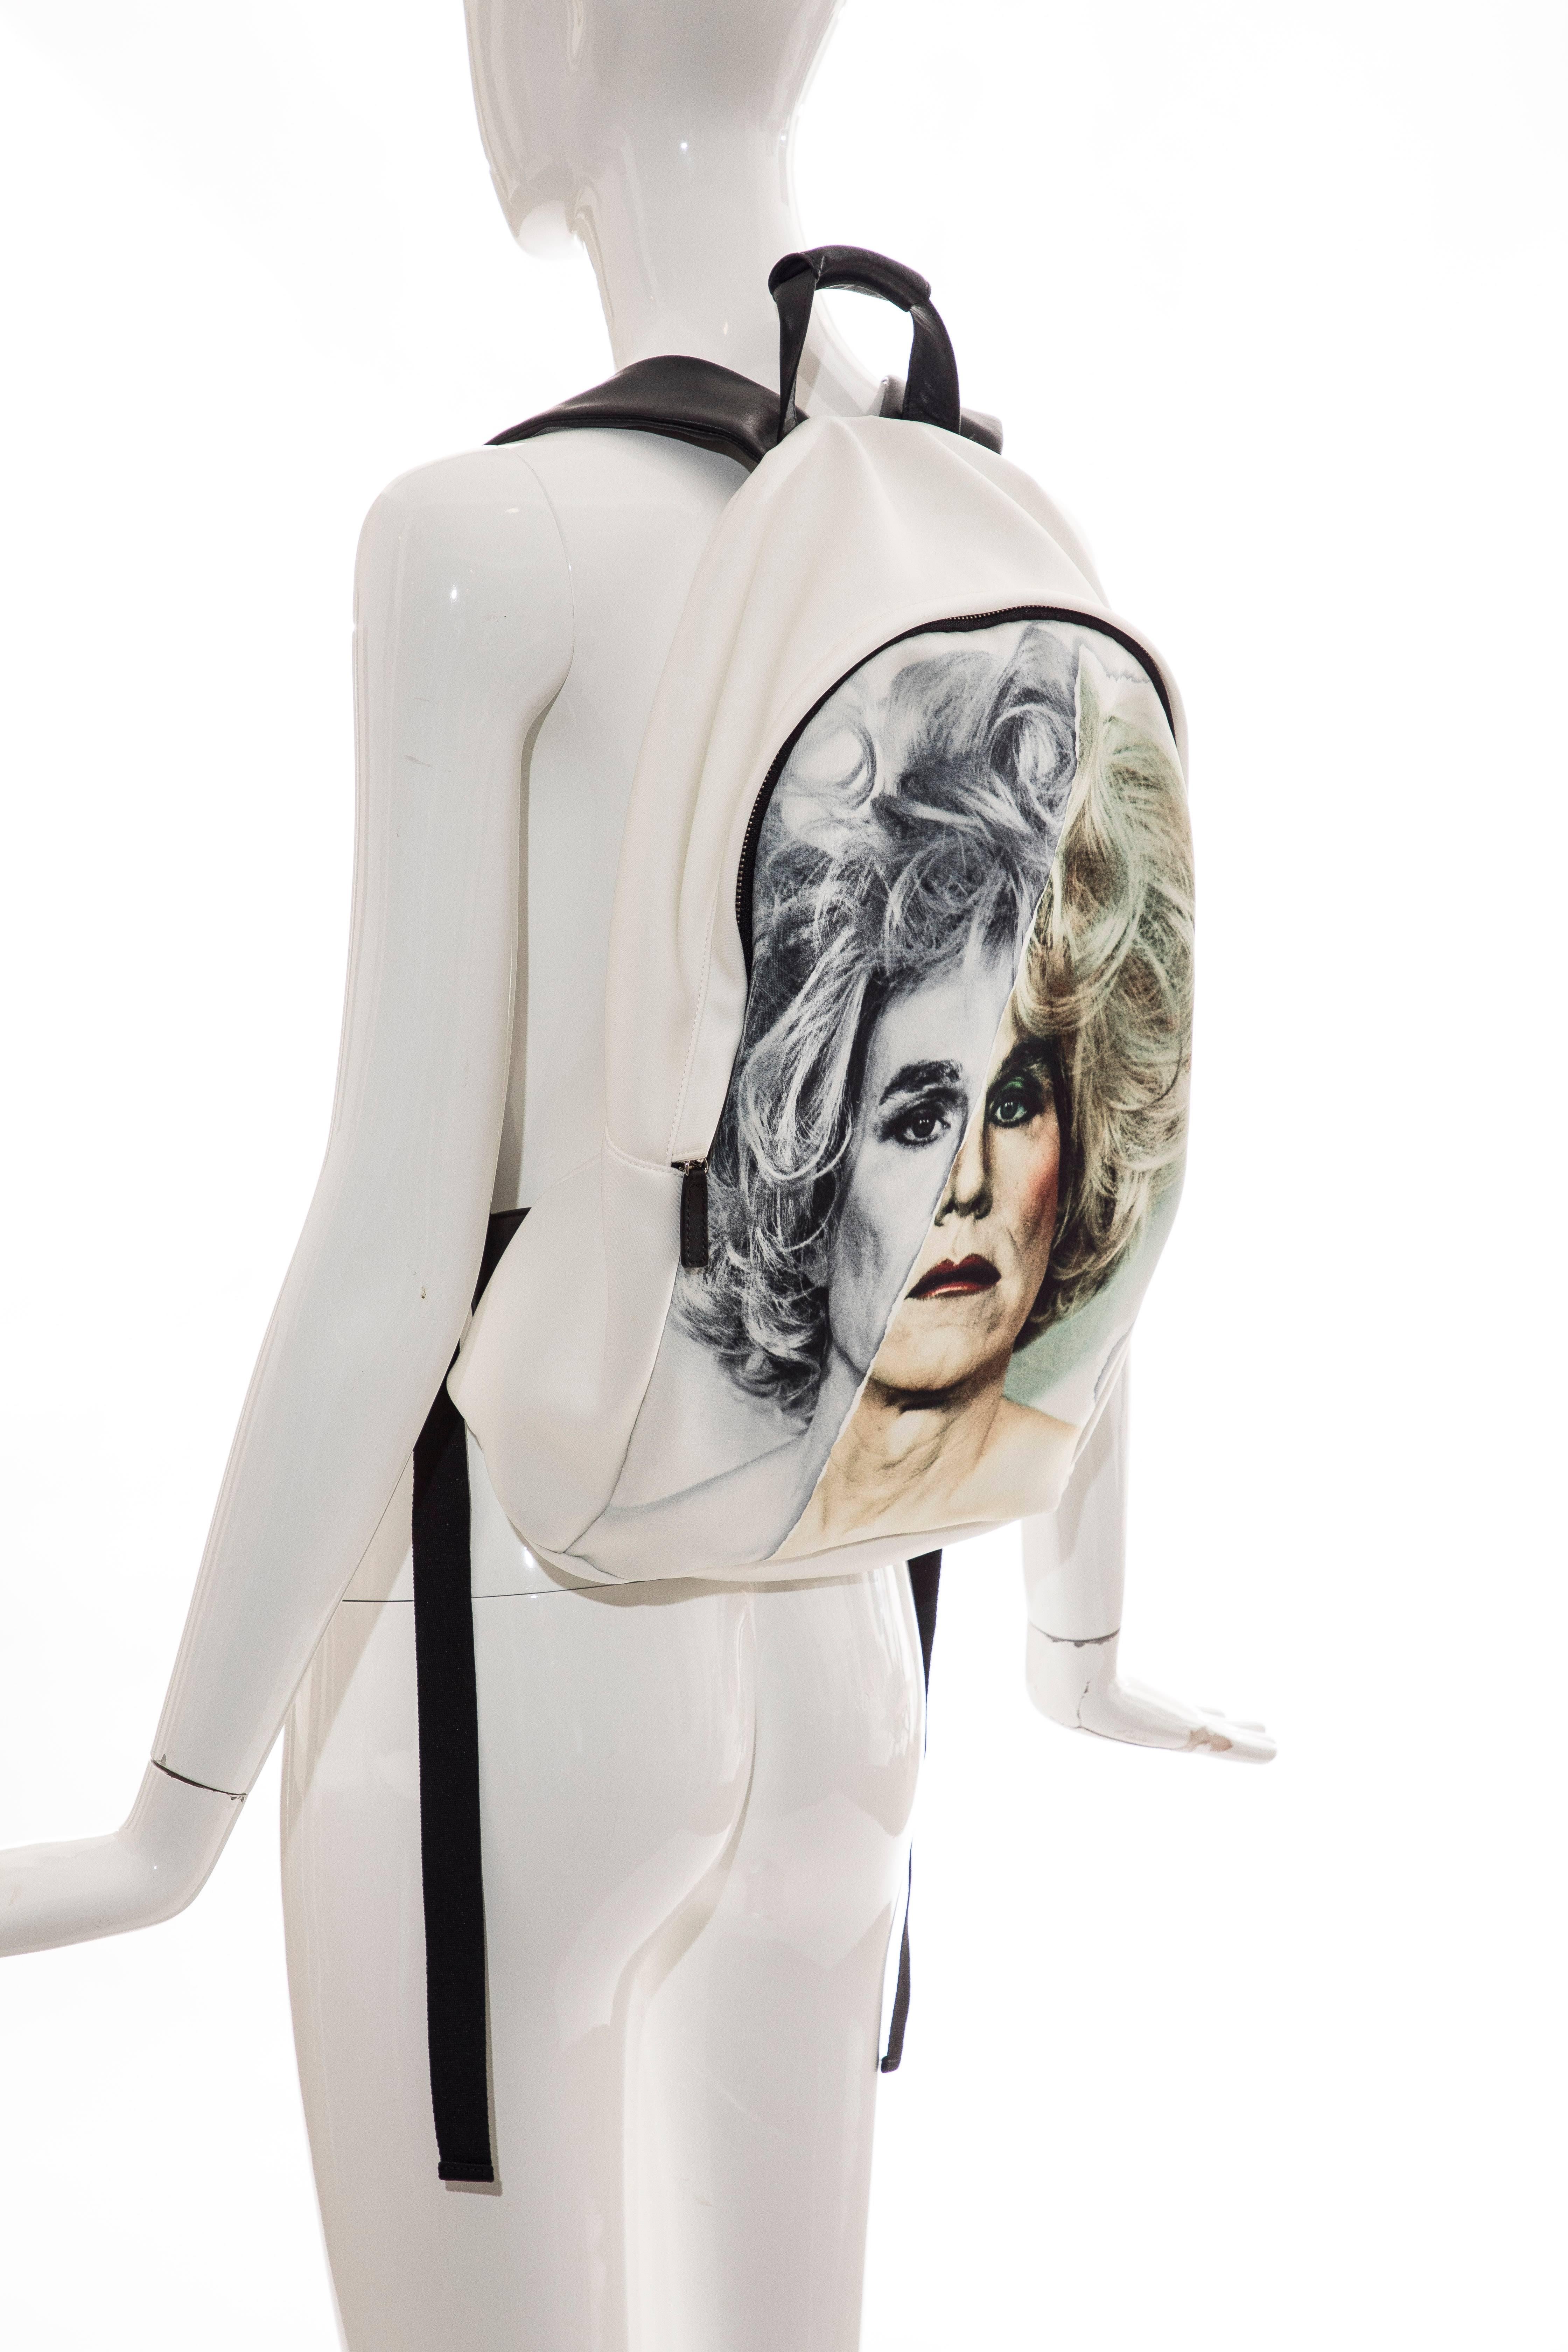  Christopher Makos for Ports 1961, Andy Warhol altered images capsule collection, white neoprene backpack with black dual adjustable shoulder straps, single flat top handle, unlined interior featuring zip pocket and zip closure at top. 

Shoulder